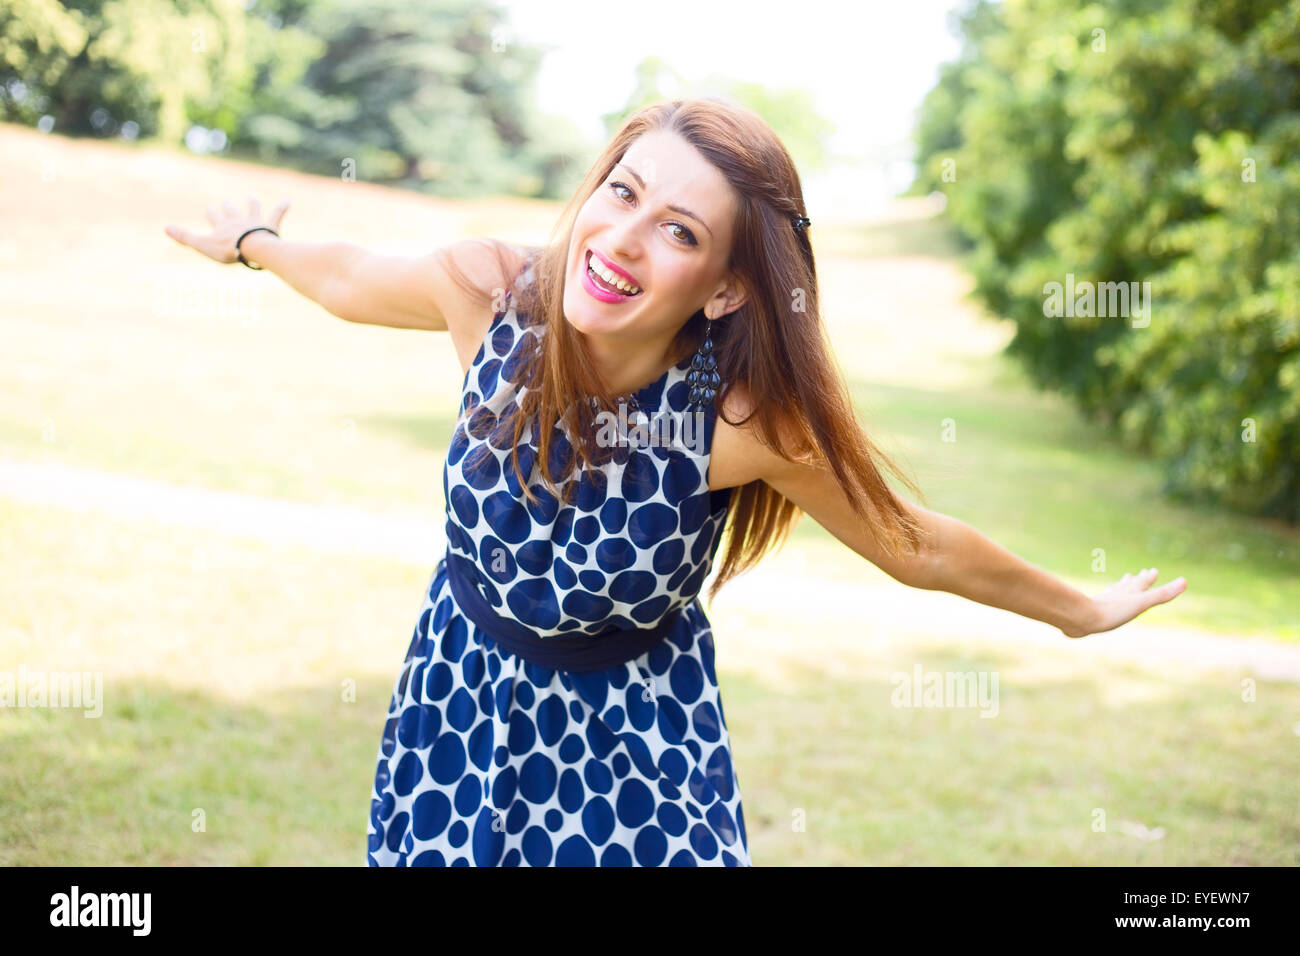 young woman enjoying herself in the park Stock Photo